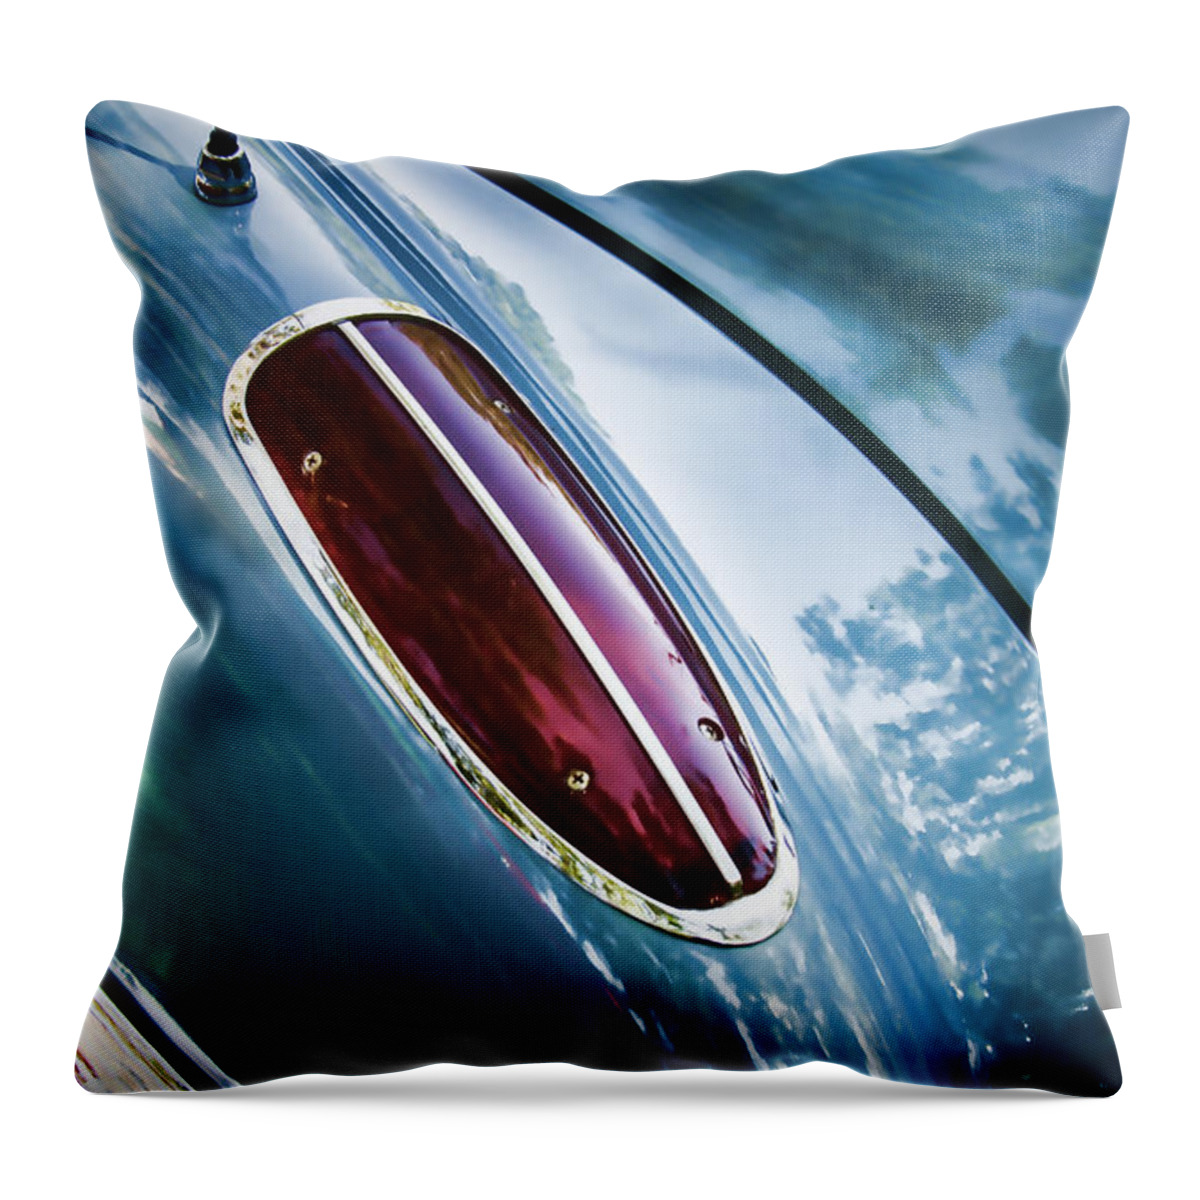 1960 Throw Pillow featuring the photograph 1960 Corvette Taillight by Nick Gray